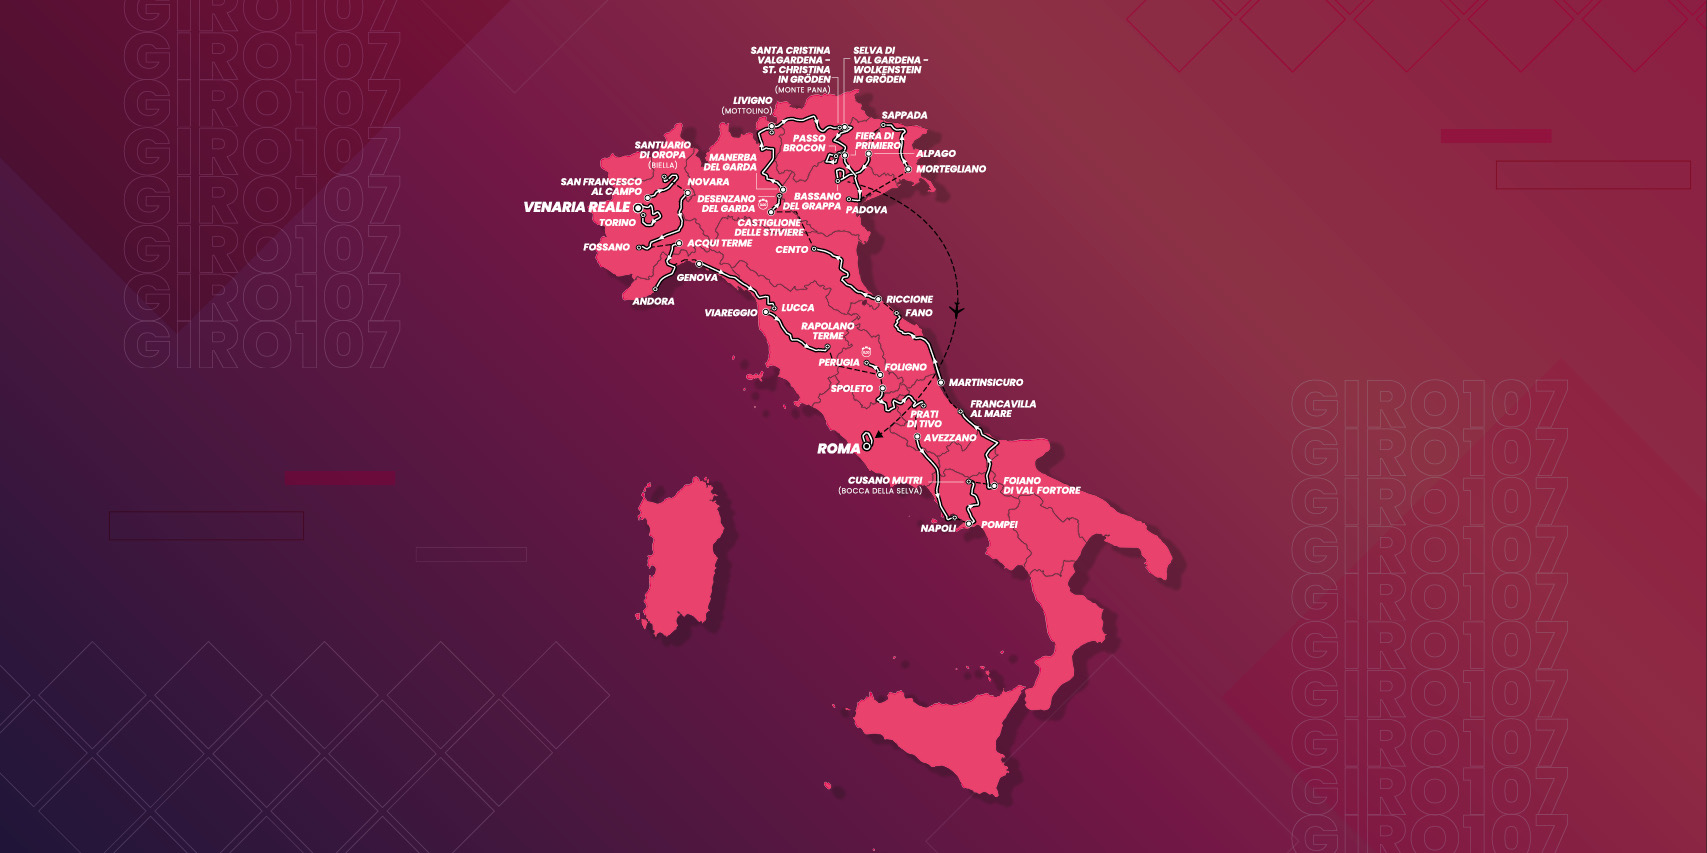 All stages of Giro d'Italia 2024 shown on the map of Italy 